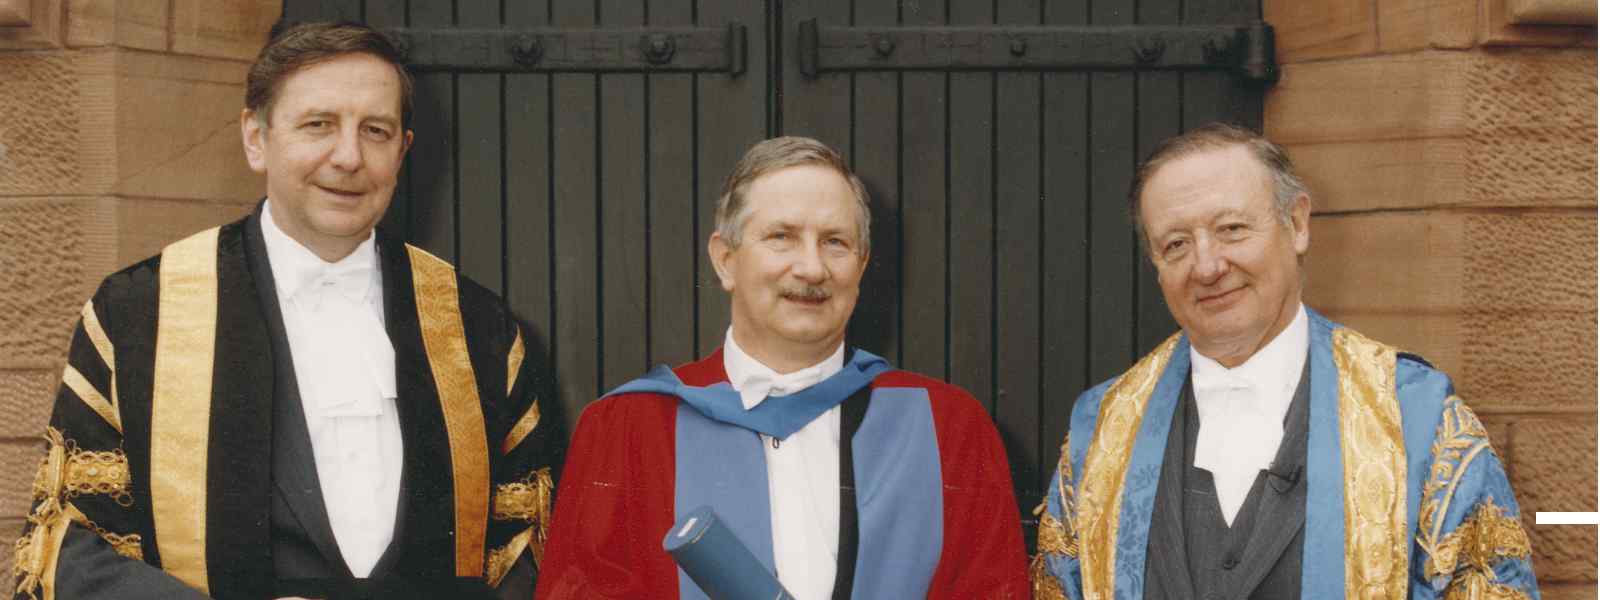 Professor Sir John Arbuthnott (left) in 1992 with then Strathclyde Chancellor Lord Tombs (right) and honorary graduate Jan Krysinski 